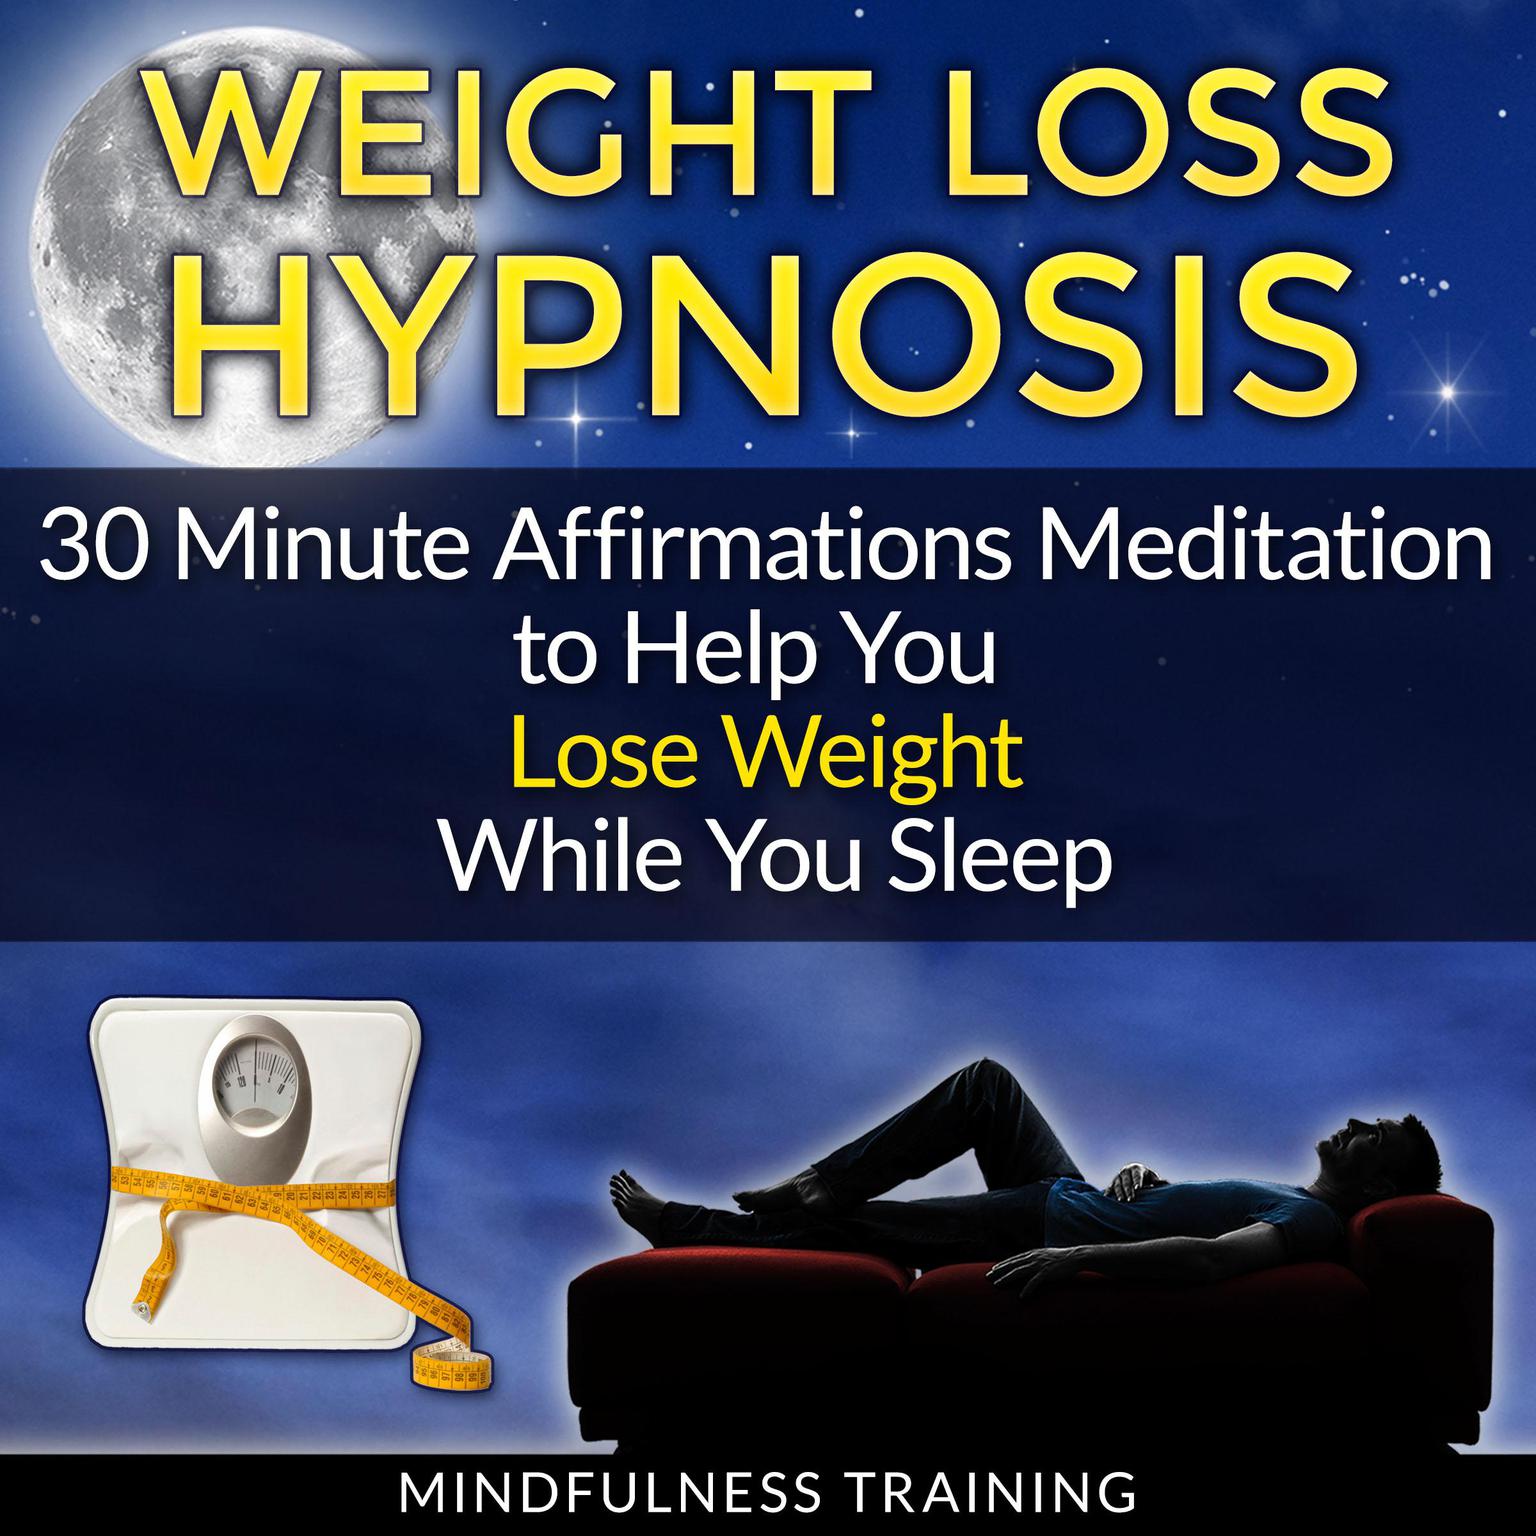 Weight Loss Hypnosis: 30 Minute Affirmations Meditation to Help You Lose Weight While You Sleep (Exercise Motivation, Weight Loss Success, Quit Sugar & Stop Sugar Techniques): 30 Minute Affirmations Meditation to Help You Lose Weight While You Sleep Audiobook, by Mindfulness Training